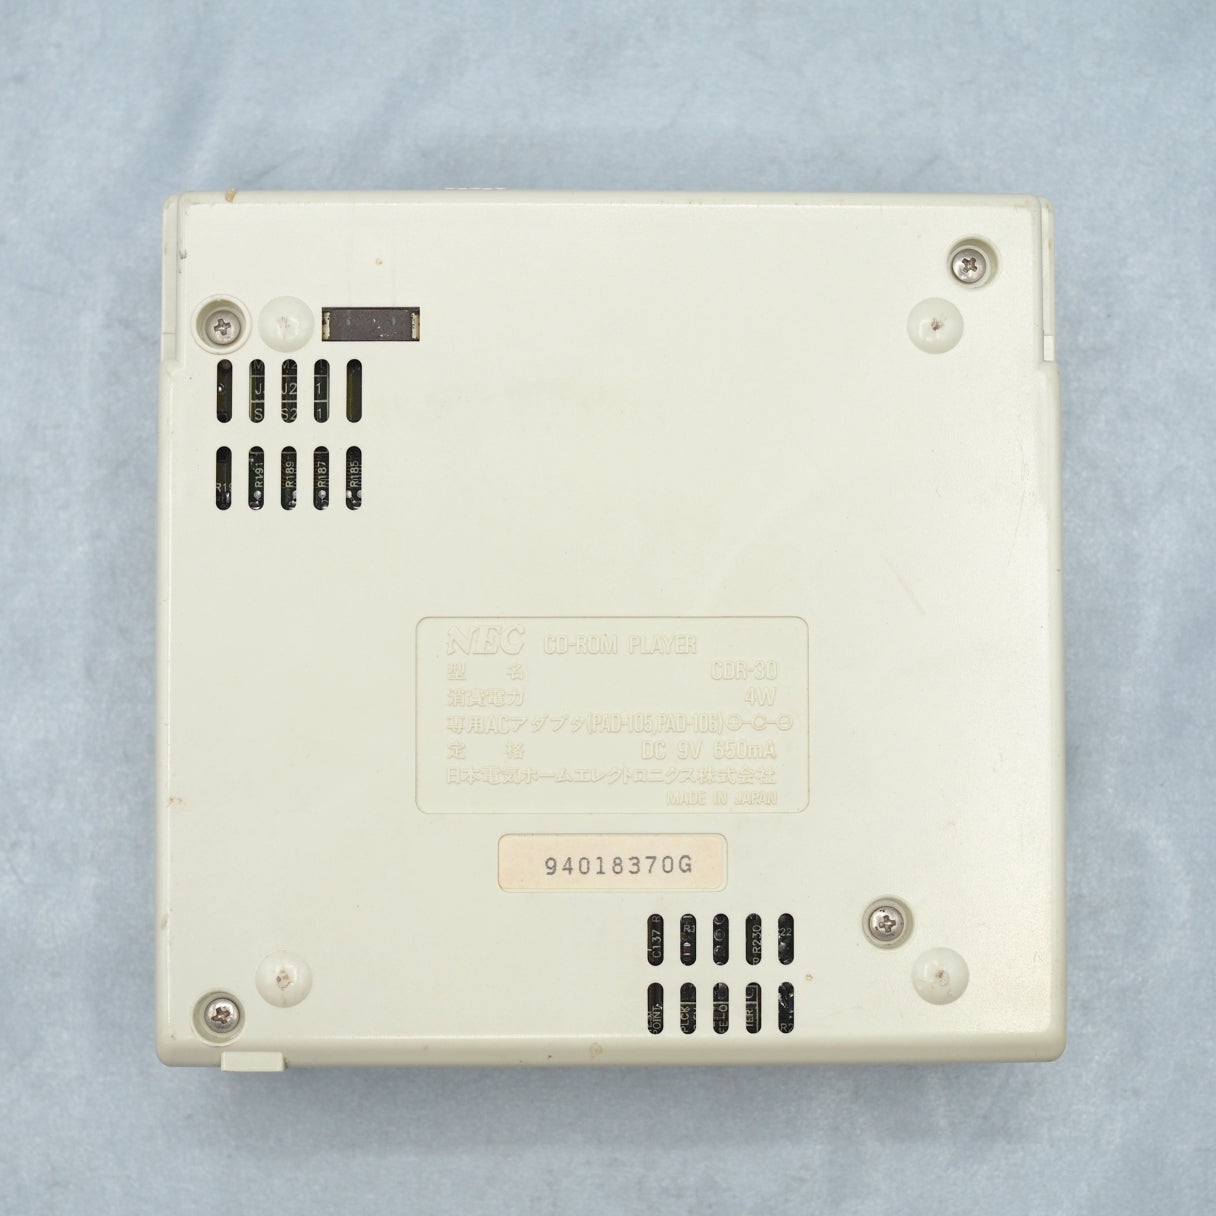 [JUNK] PC Engine CD-ROM2 CDR-30